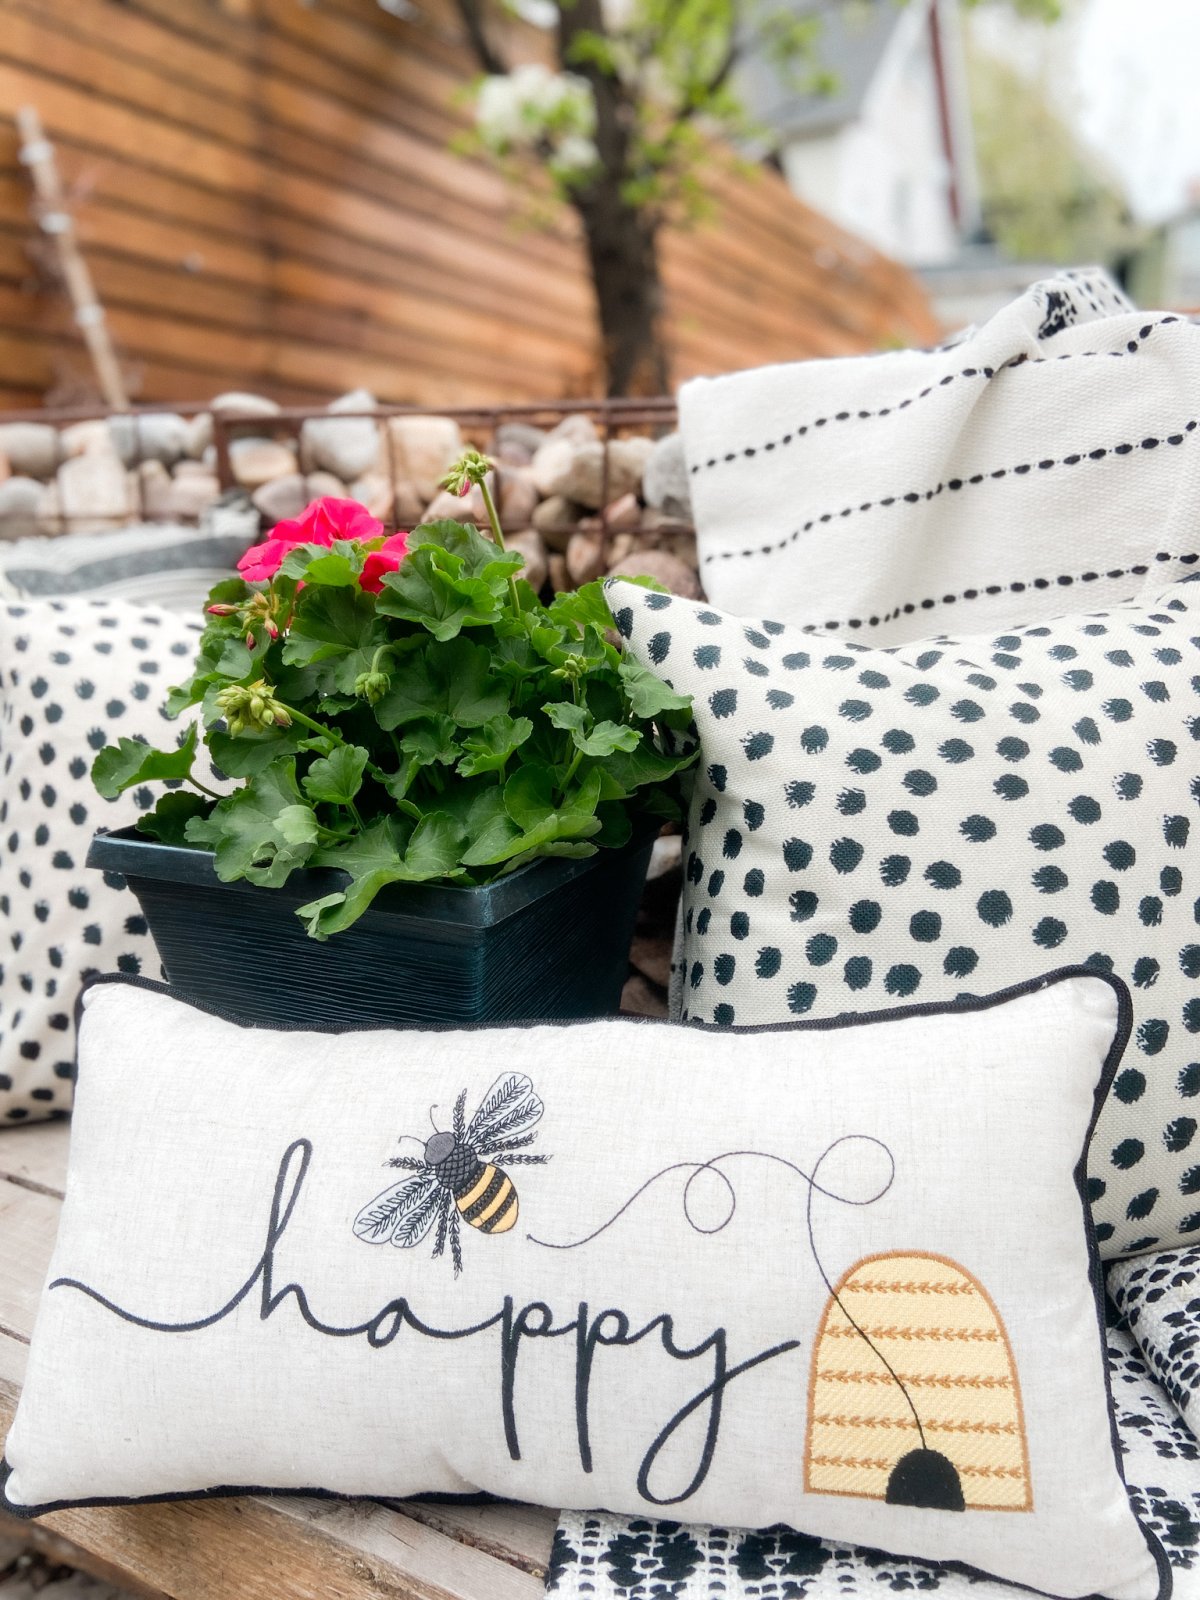 DIY Beehives and Beehive Backyard Inspo! Create cute and inexpensive beehives, add beehive pillows and create a hanging basket garden for a beautiful summer patio!